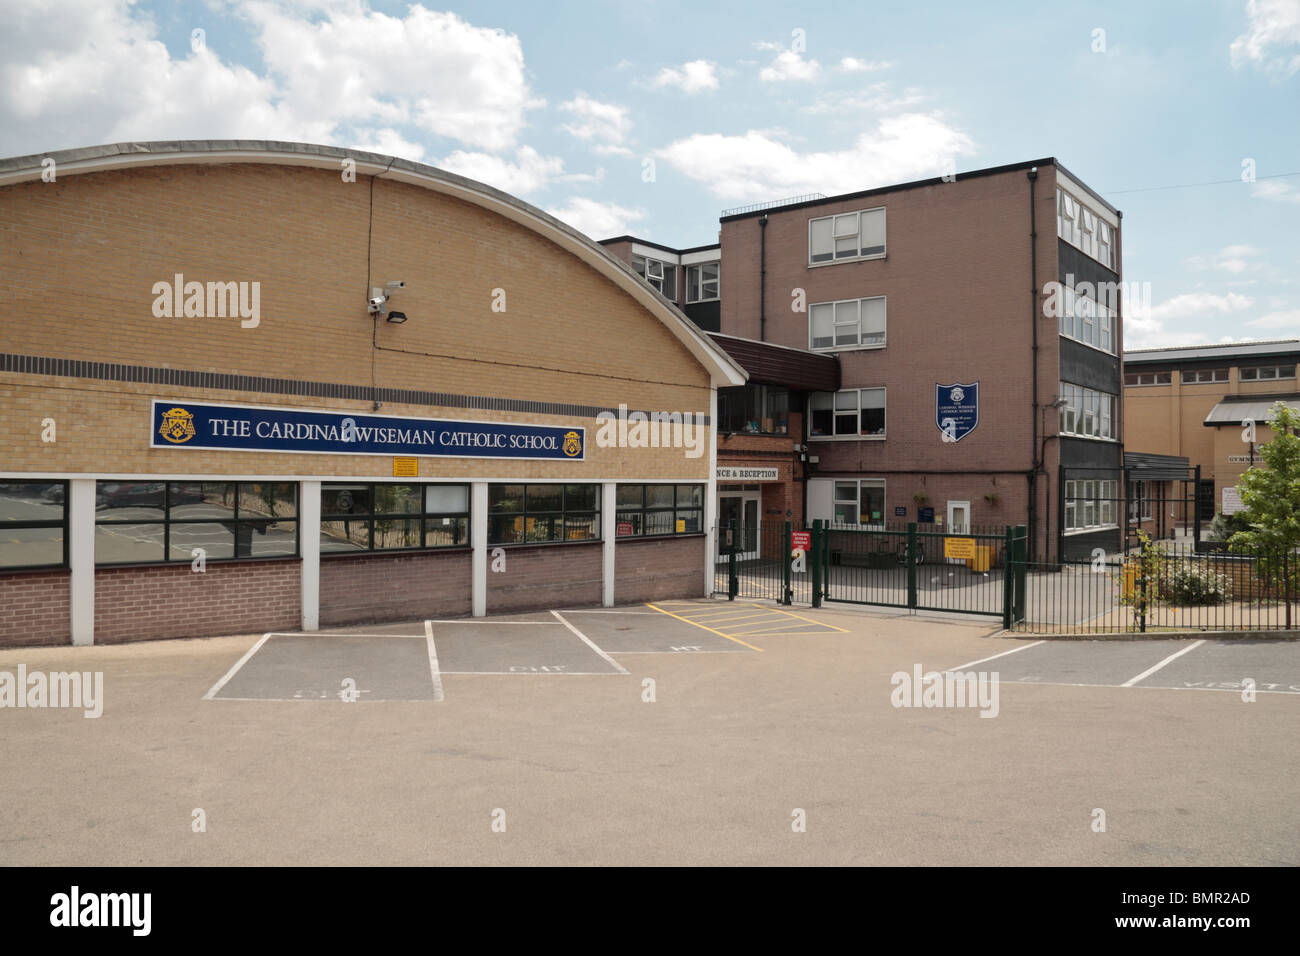 The main entrance to Cardinal Wiseman Catholic School in Greenford, Middlesex, UK. Stock Photo